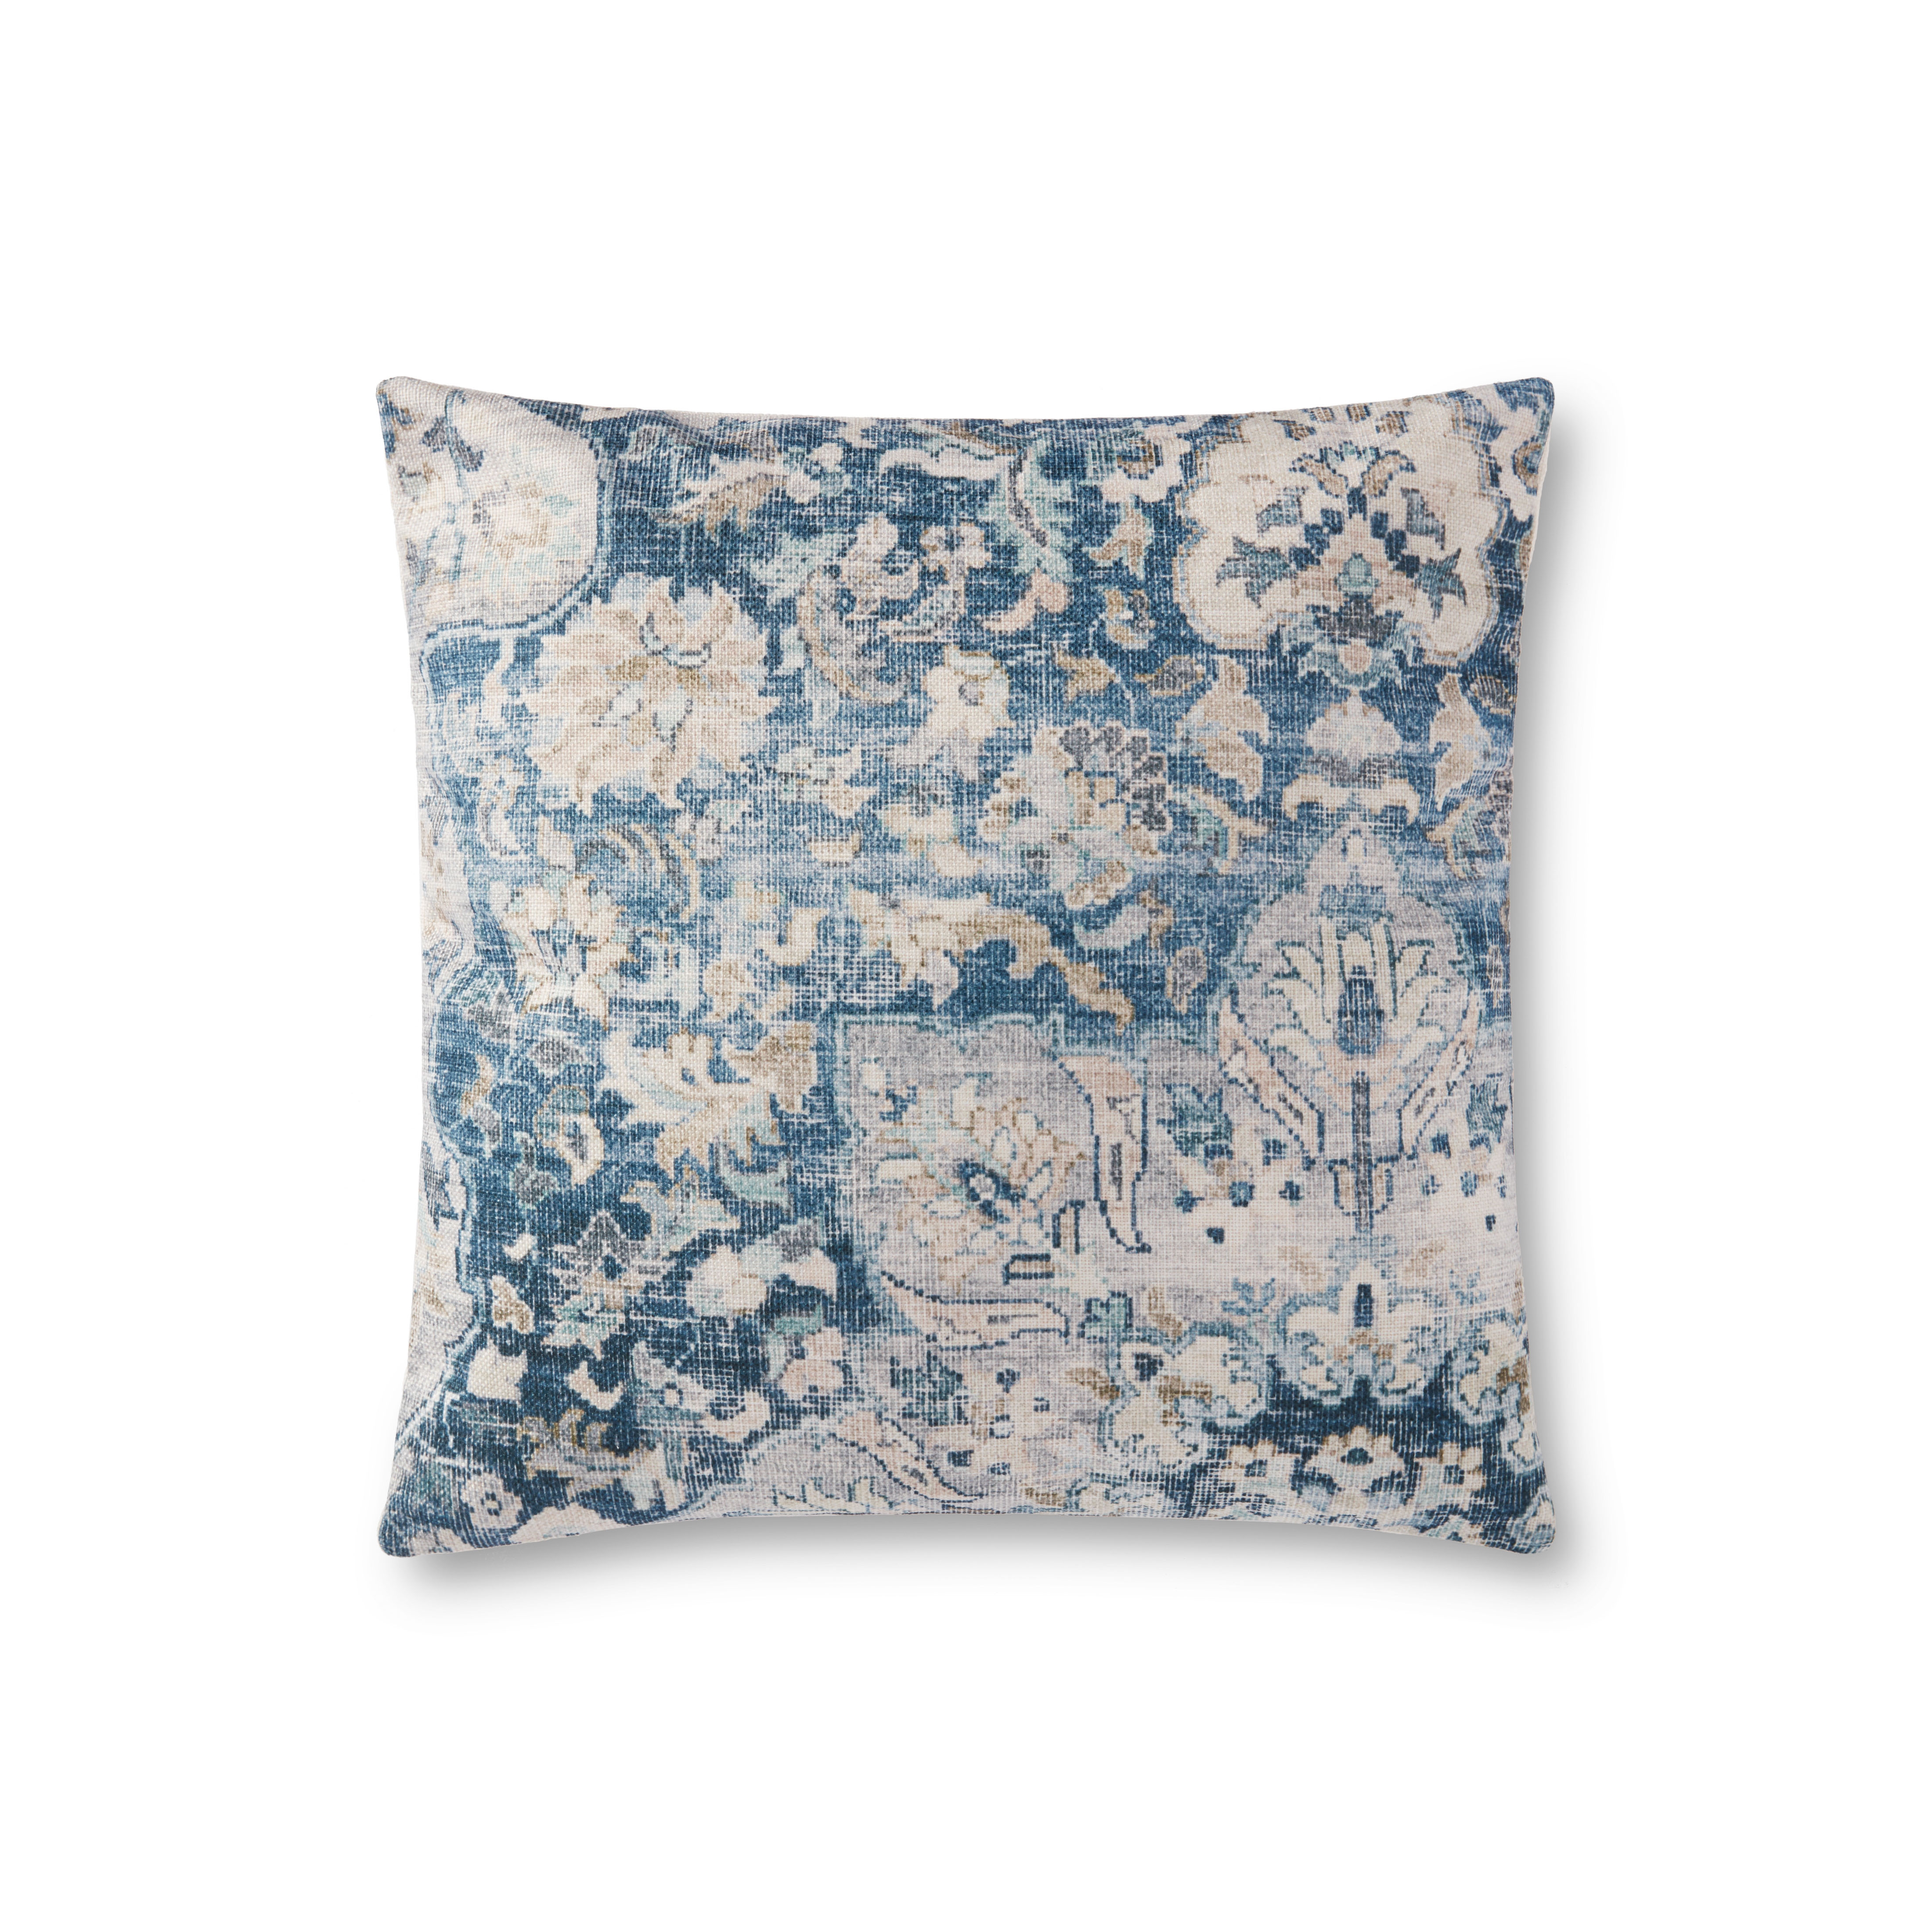 PILLOWS P0912 BLUE / MULTI 18" x 18" Cover w/Poly - Image 0